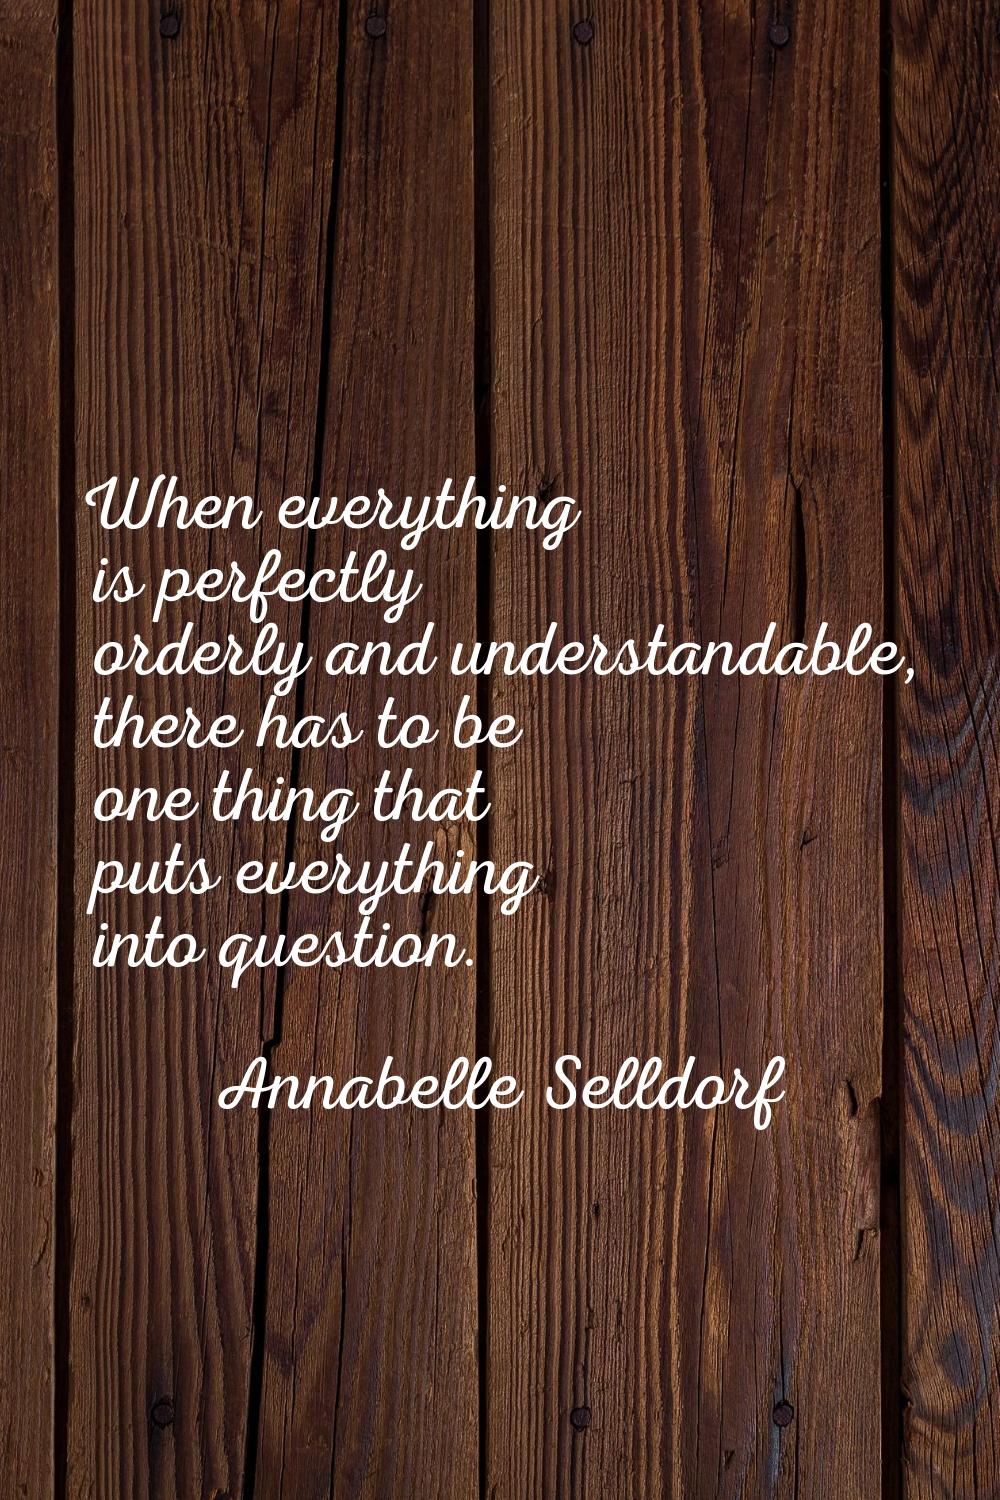 When everything is perfectly orderly and understandable, there has to be one thing that puts everyt